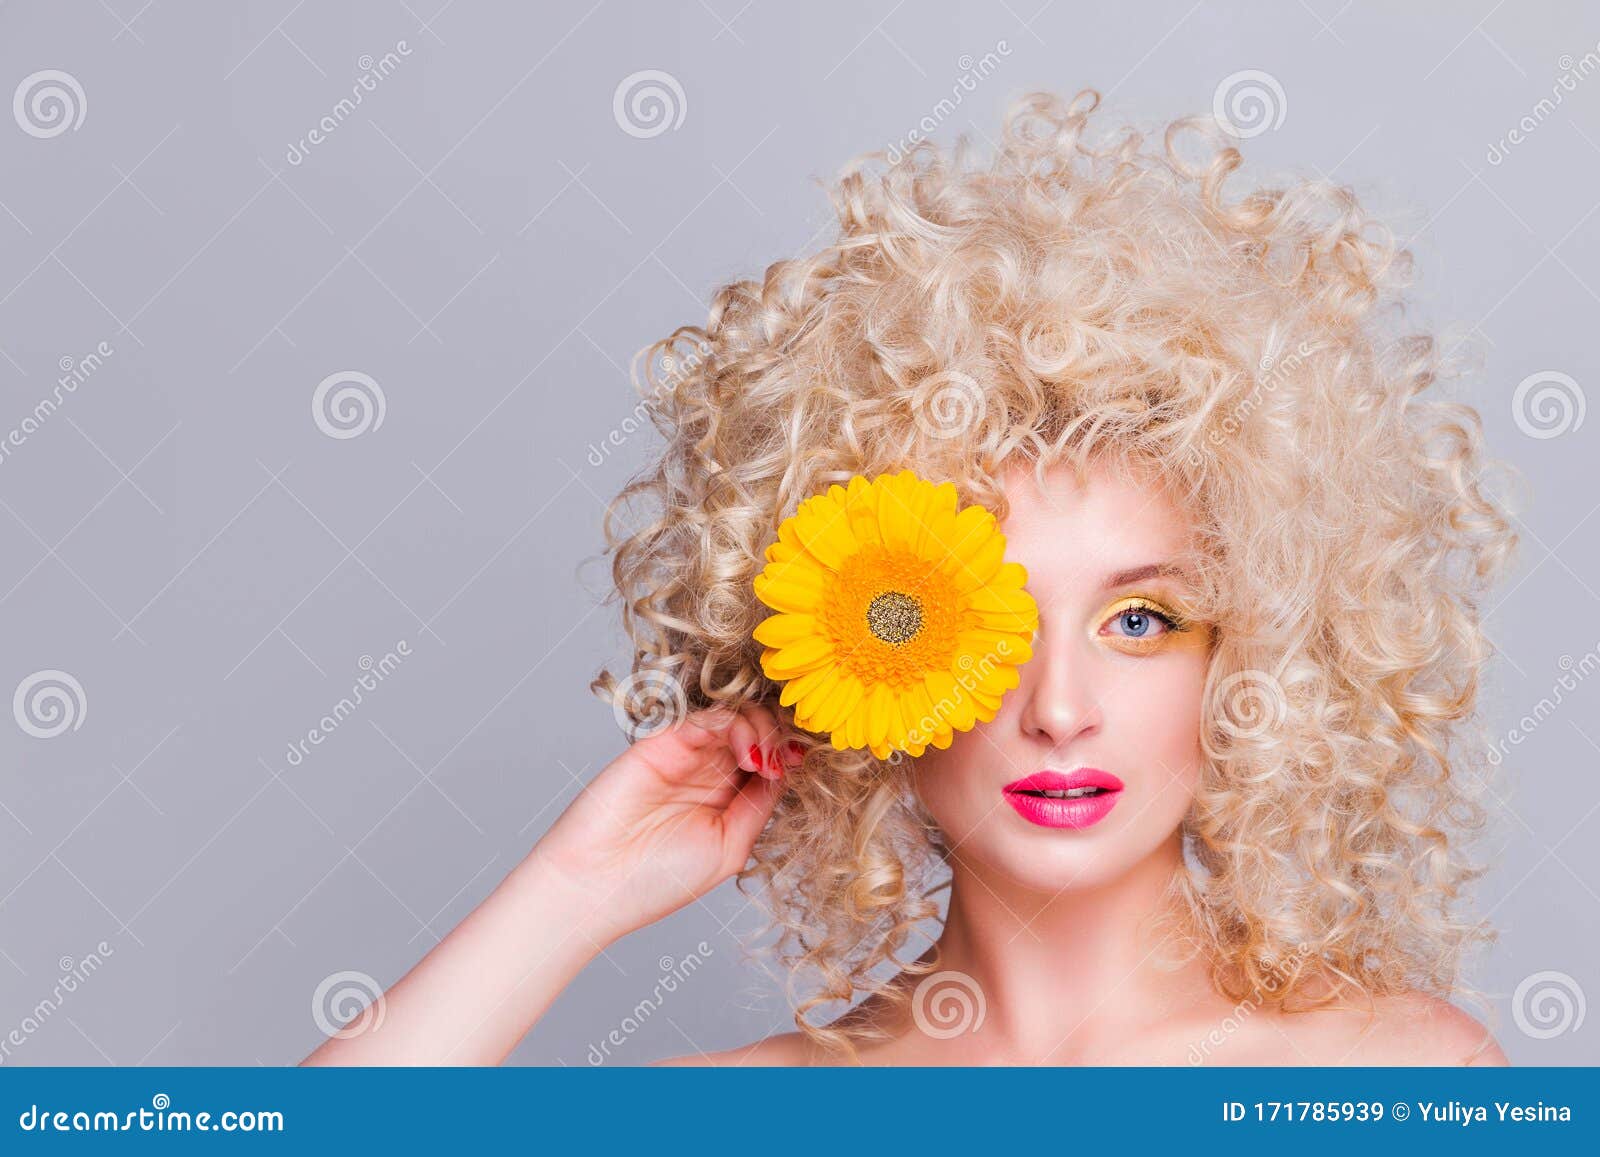 7. Blonde Curly Haired Toddler in a Sunflower Field - wide 8